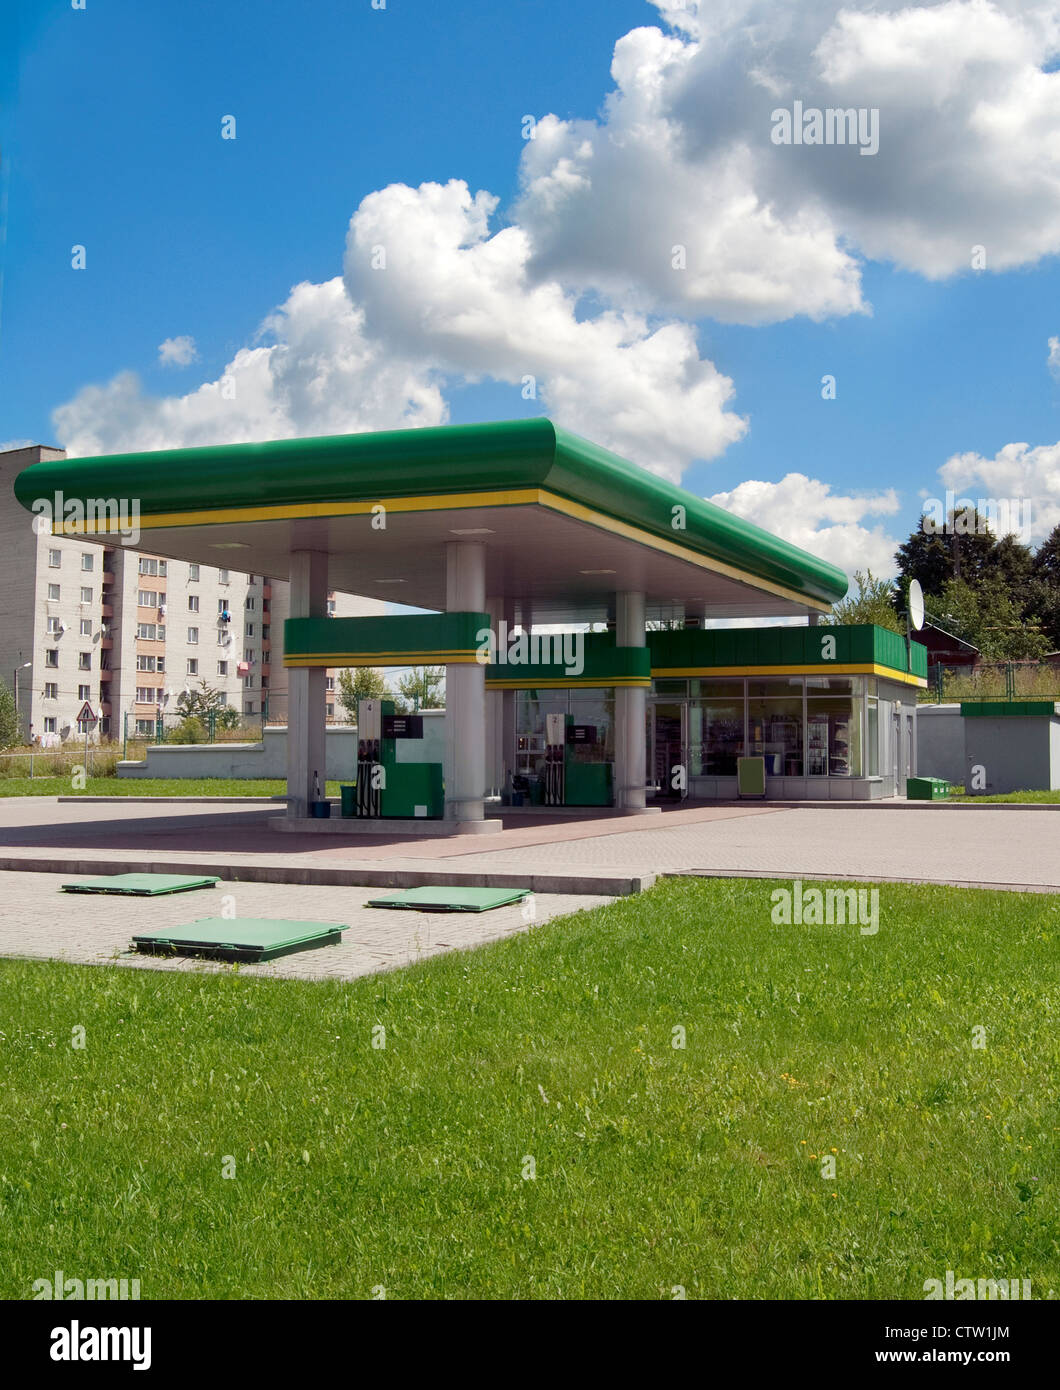 gas refuel station against cloudy sky Stock Photo